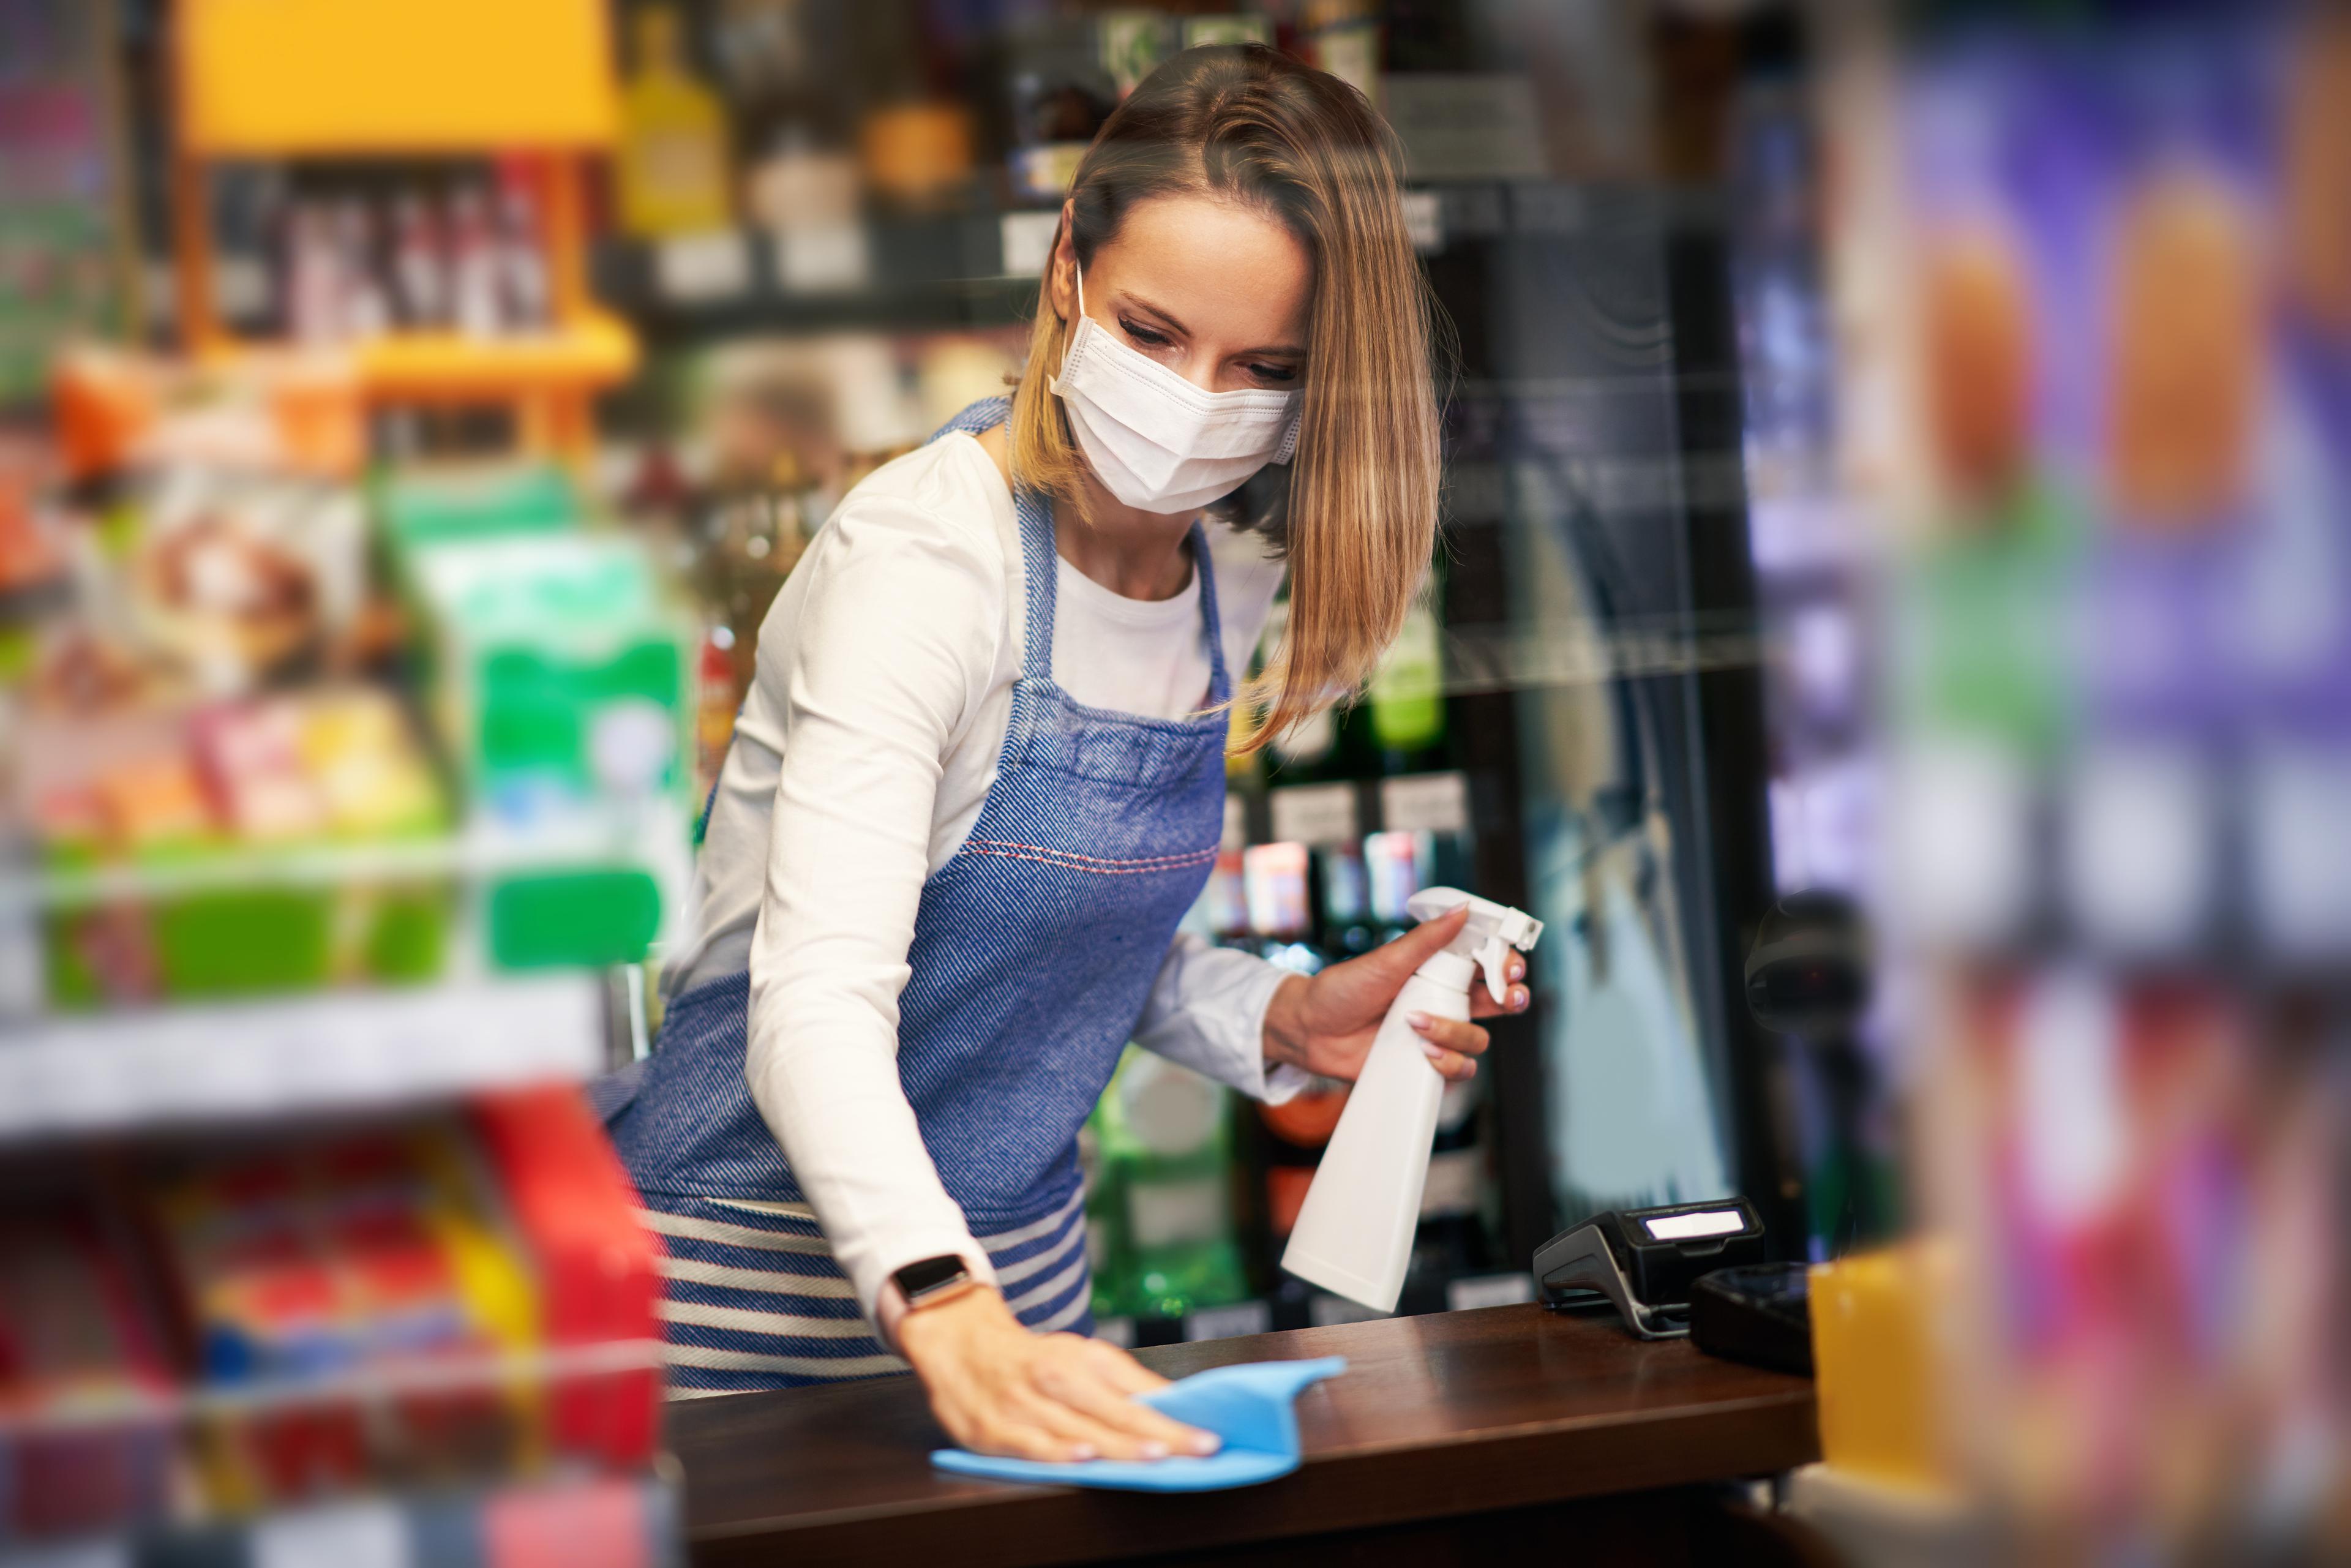 retail staff member cleaning register area